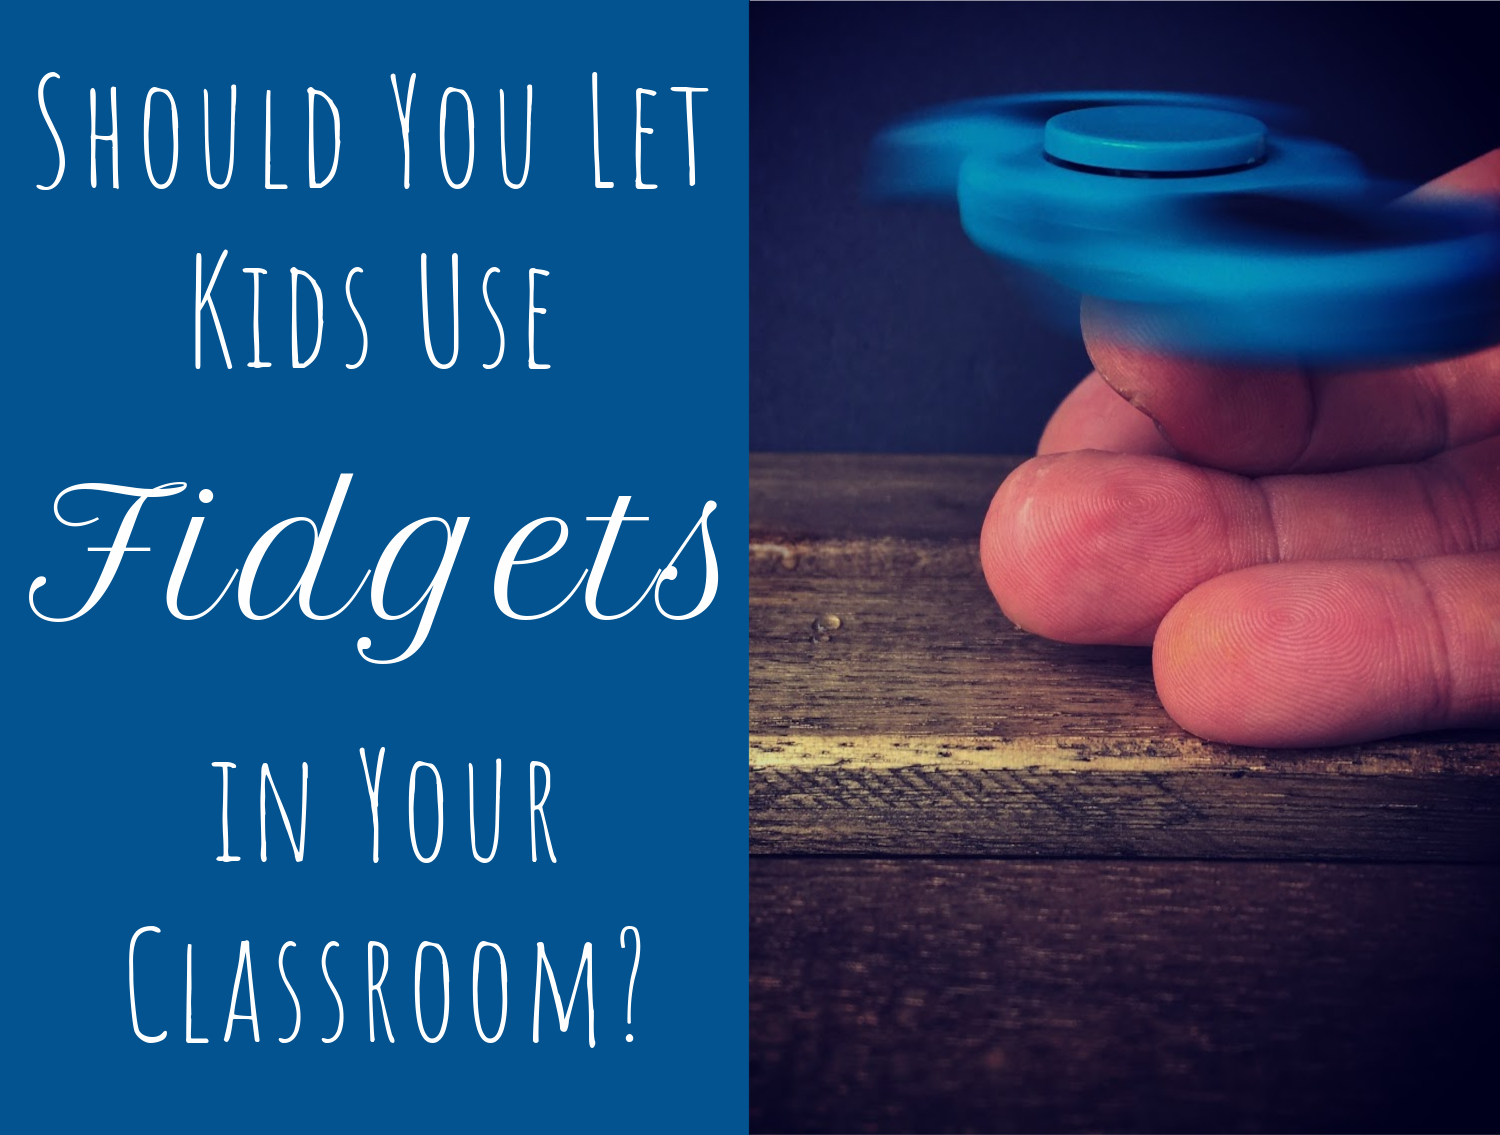 Fidget spinners: Is this classroom fad a friend or foe?